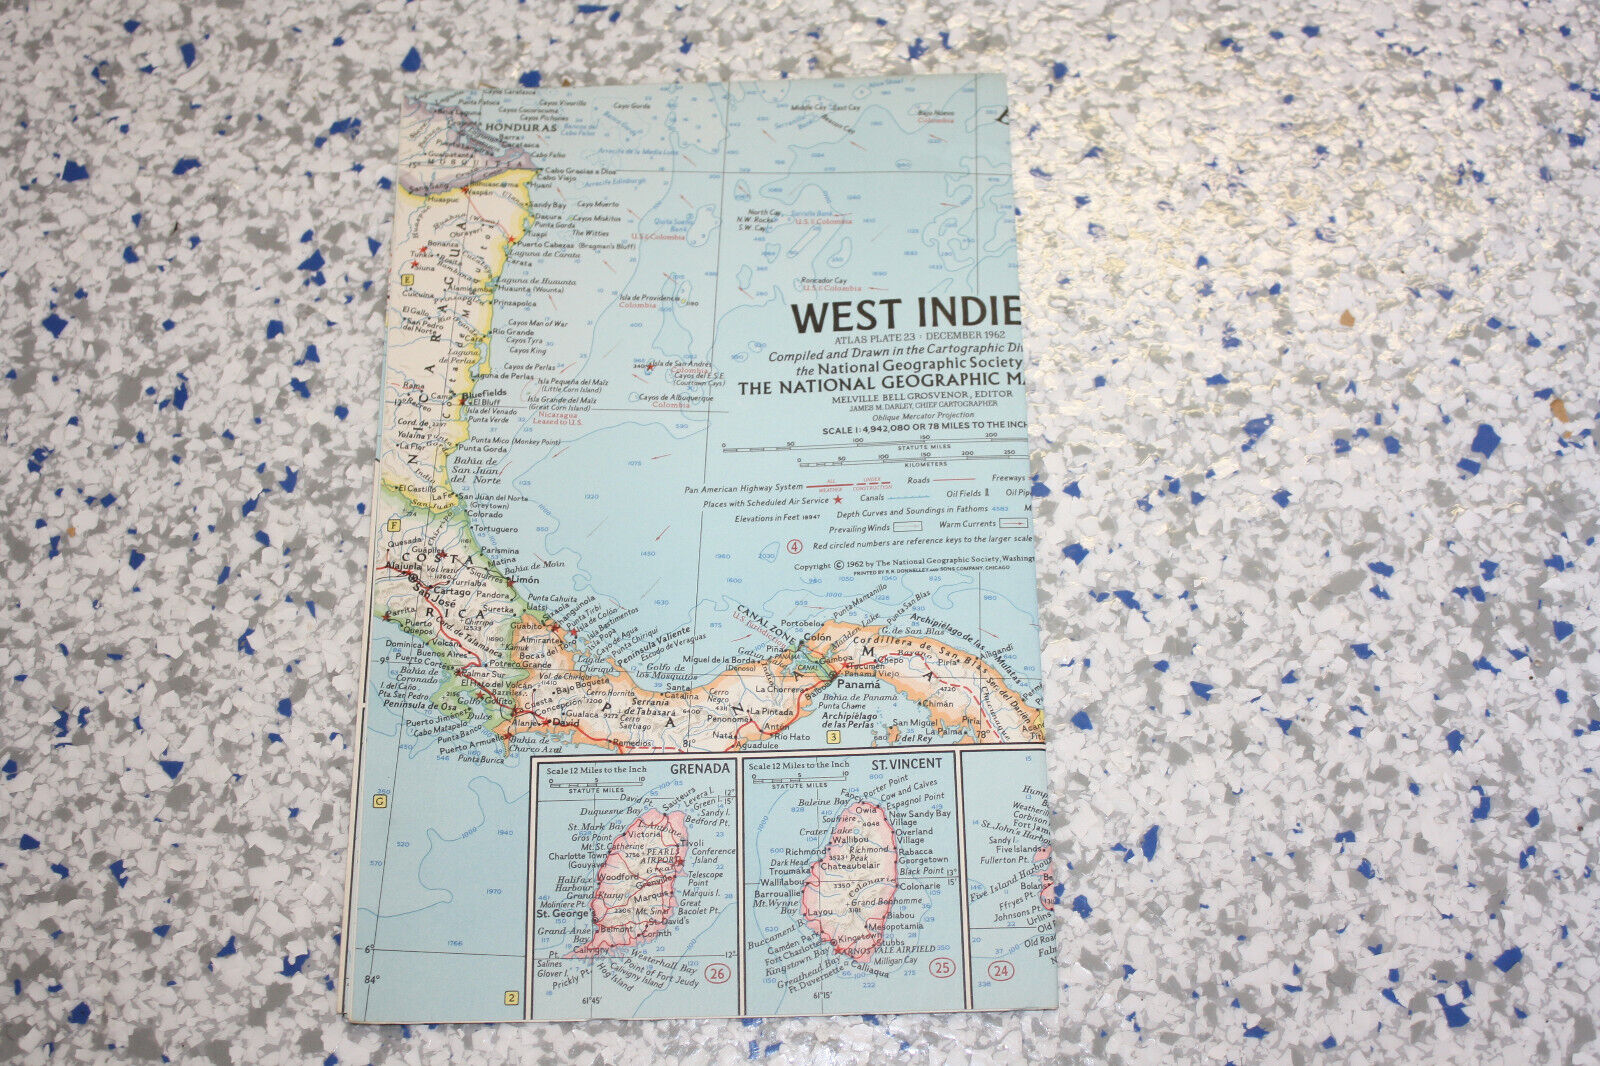 THE WEST INDIES - NATIONAL GEOGRAPHIC MAP - DECEMBER 1962